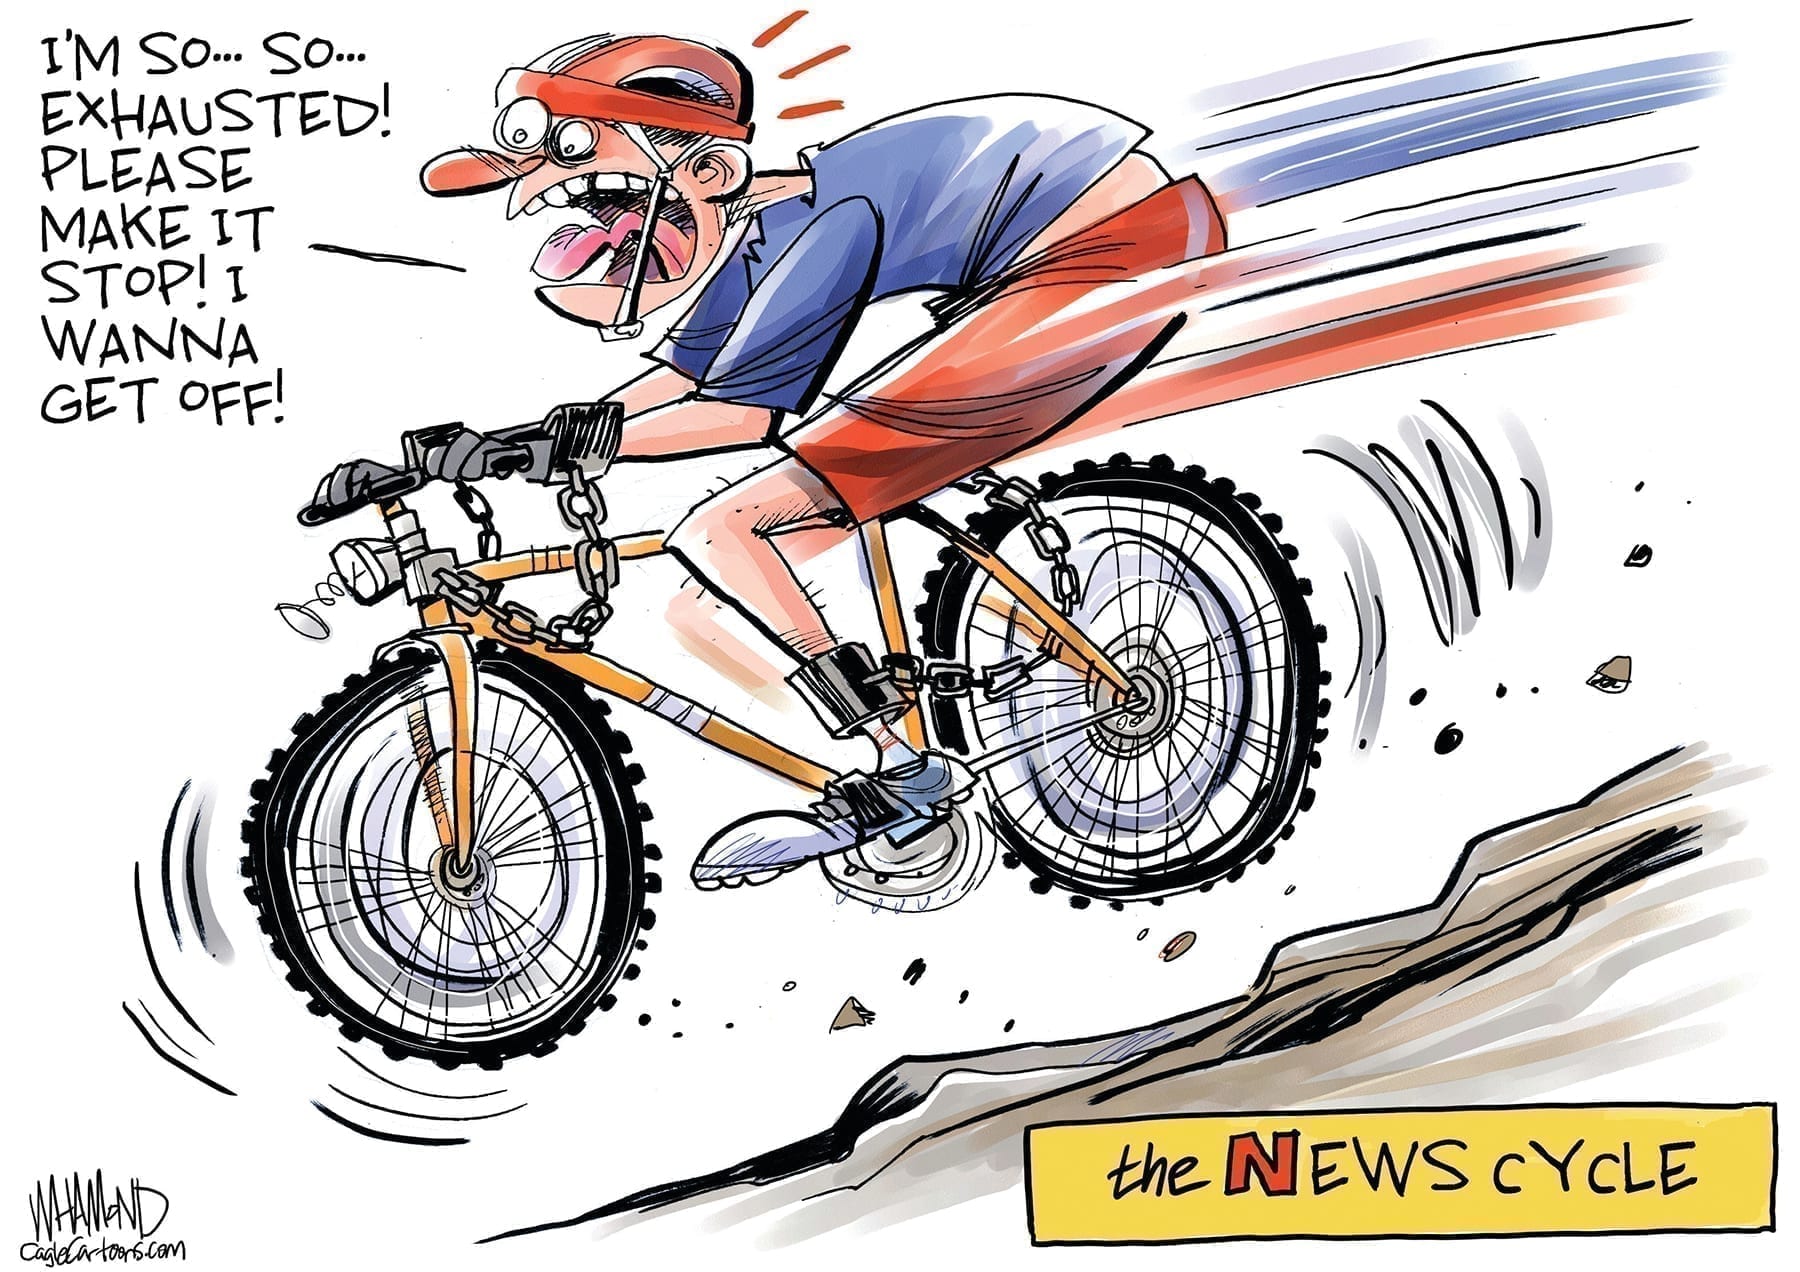 The news cycle